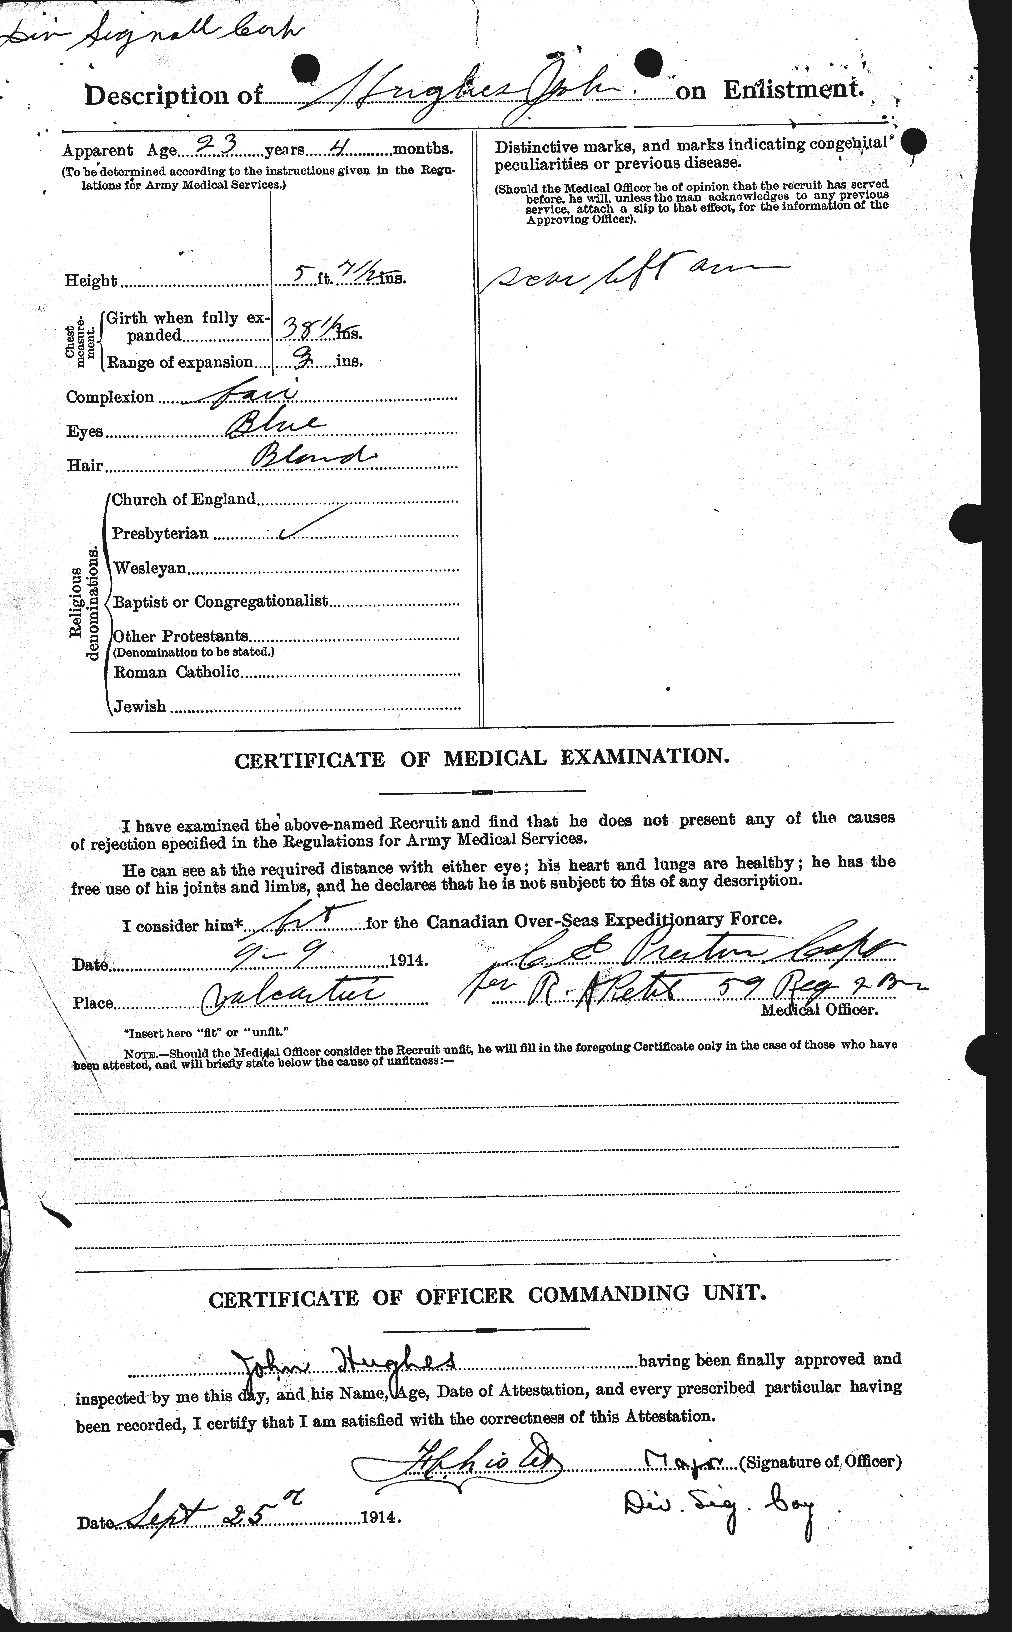 Personnel Records of the First World War - CEF 404002b